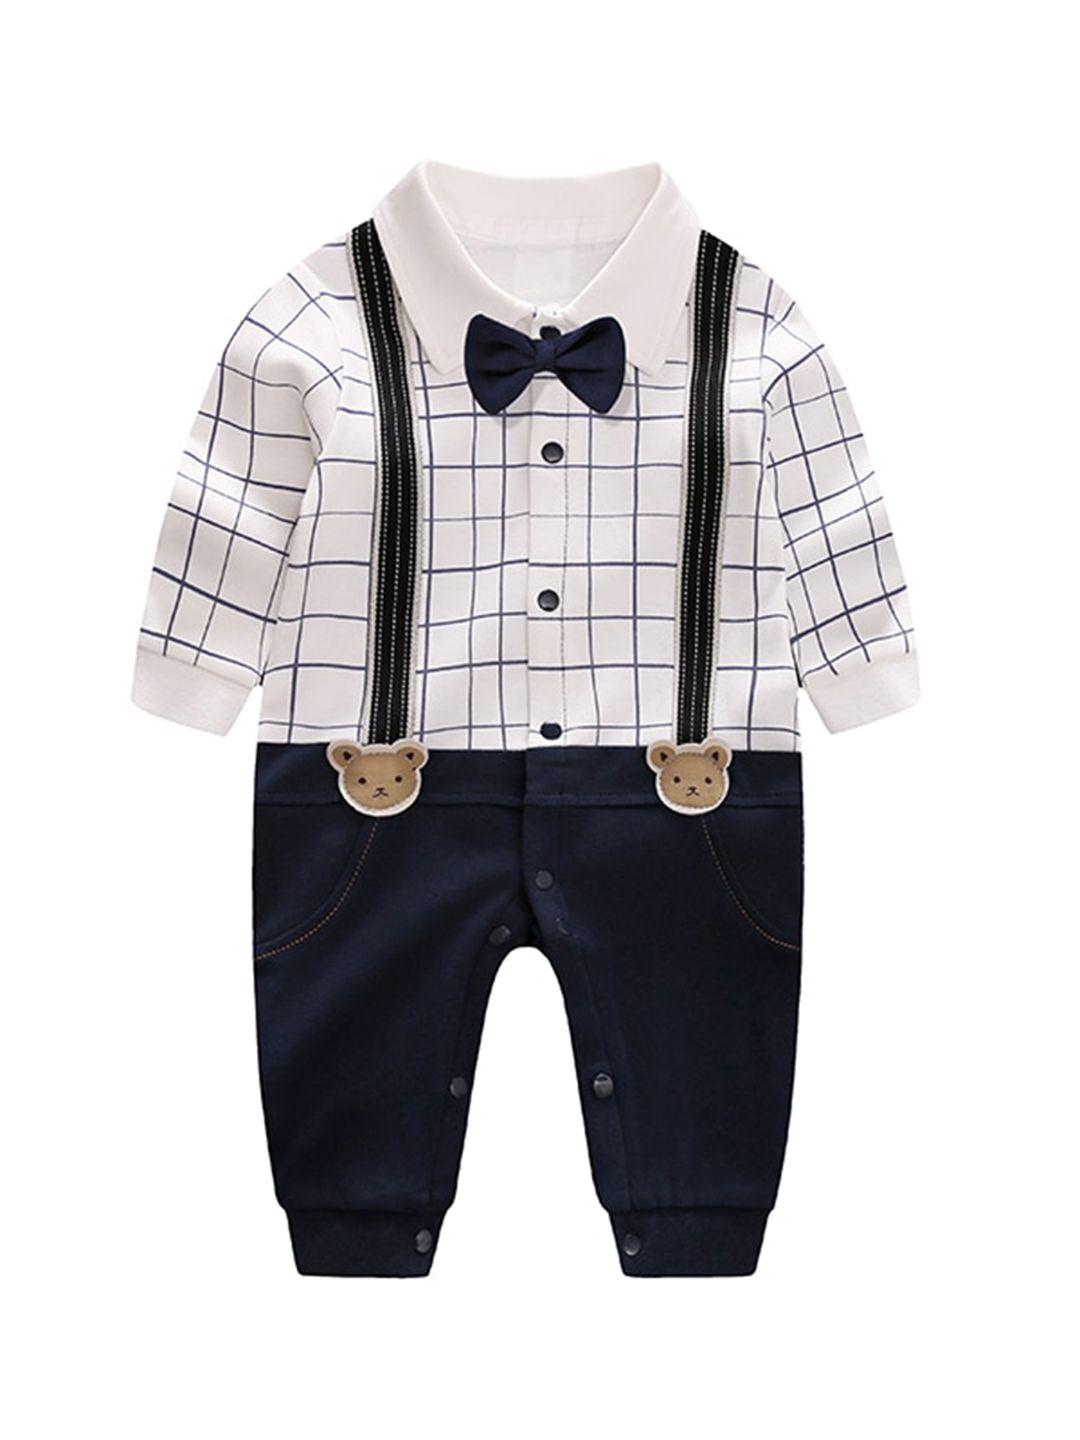 stylecast-infant-boys-navy-blue-checked-cotton-rompers